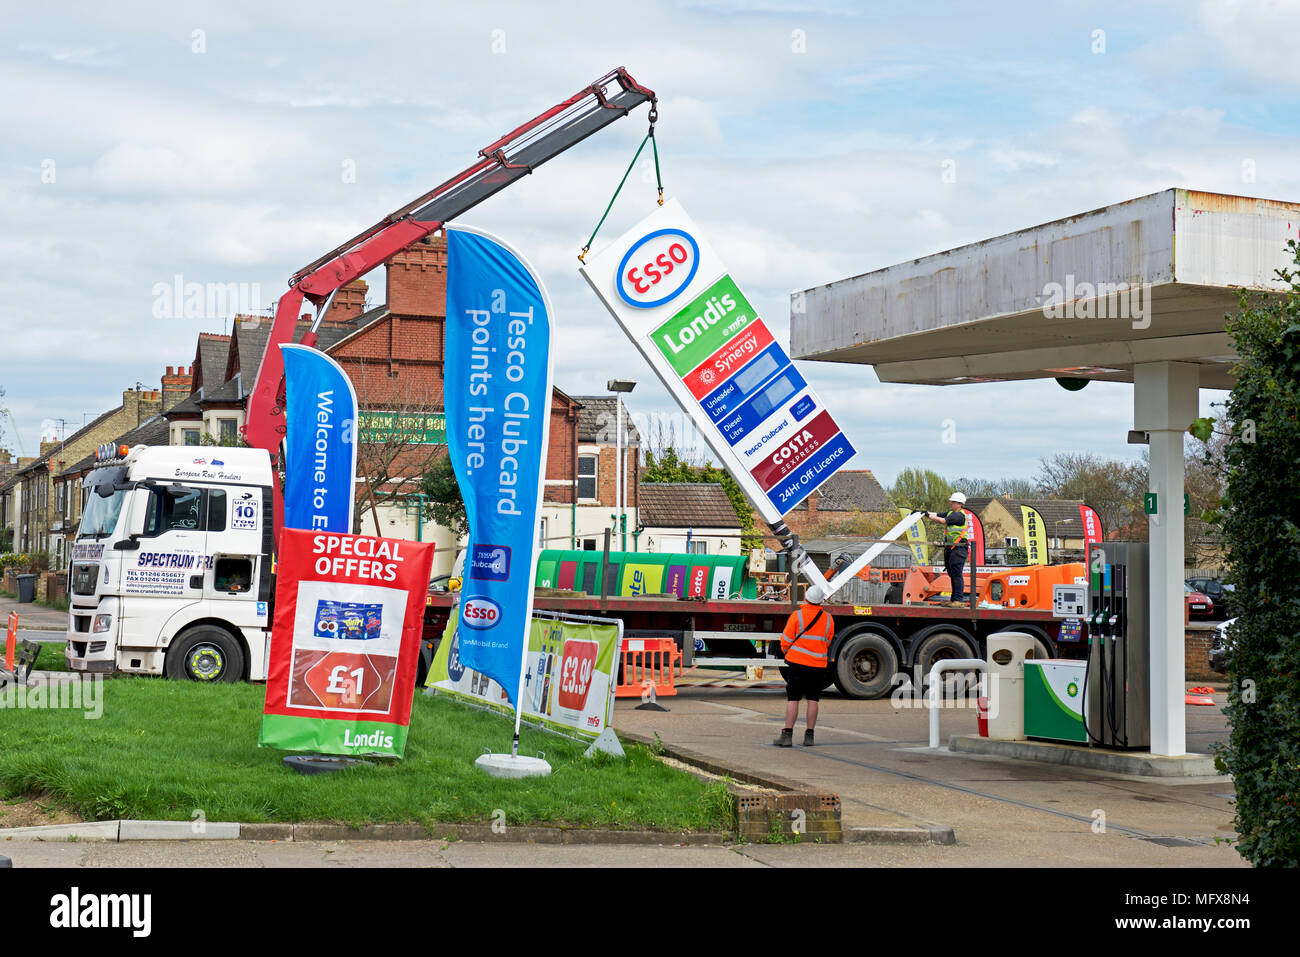 Replacing BP sign with Esso sign at a petrol station in Peterborough, Cambridgeshire, England UK Stock Photo